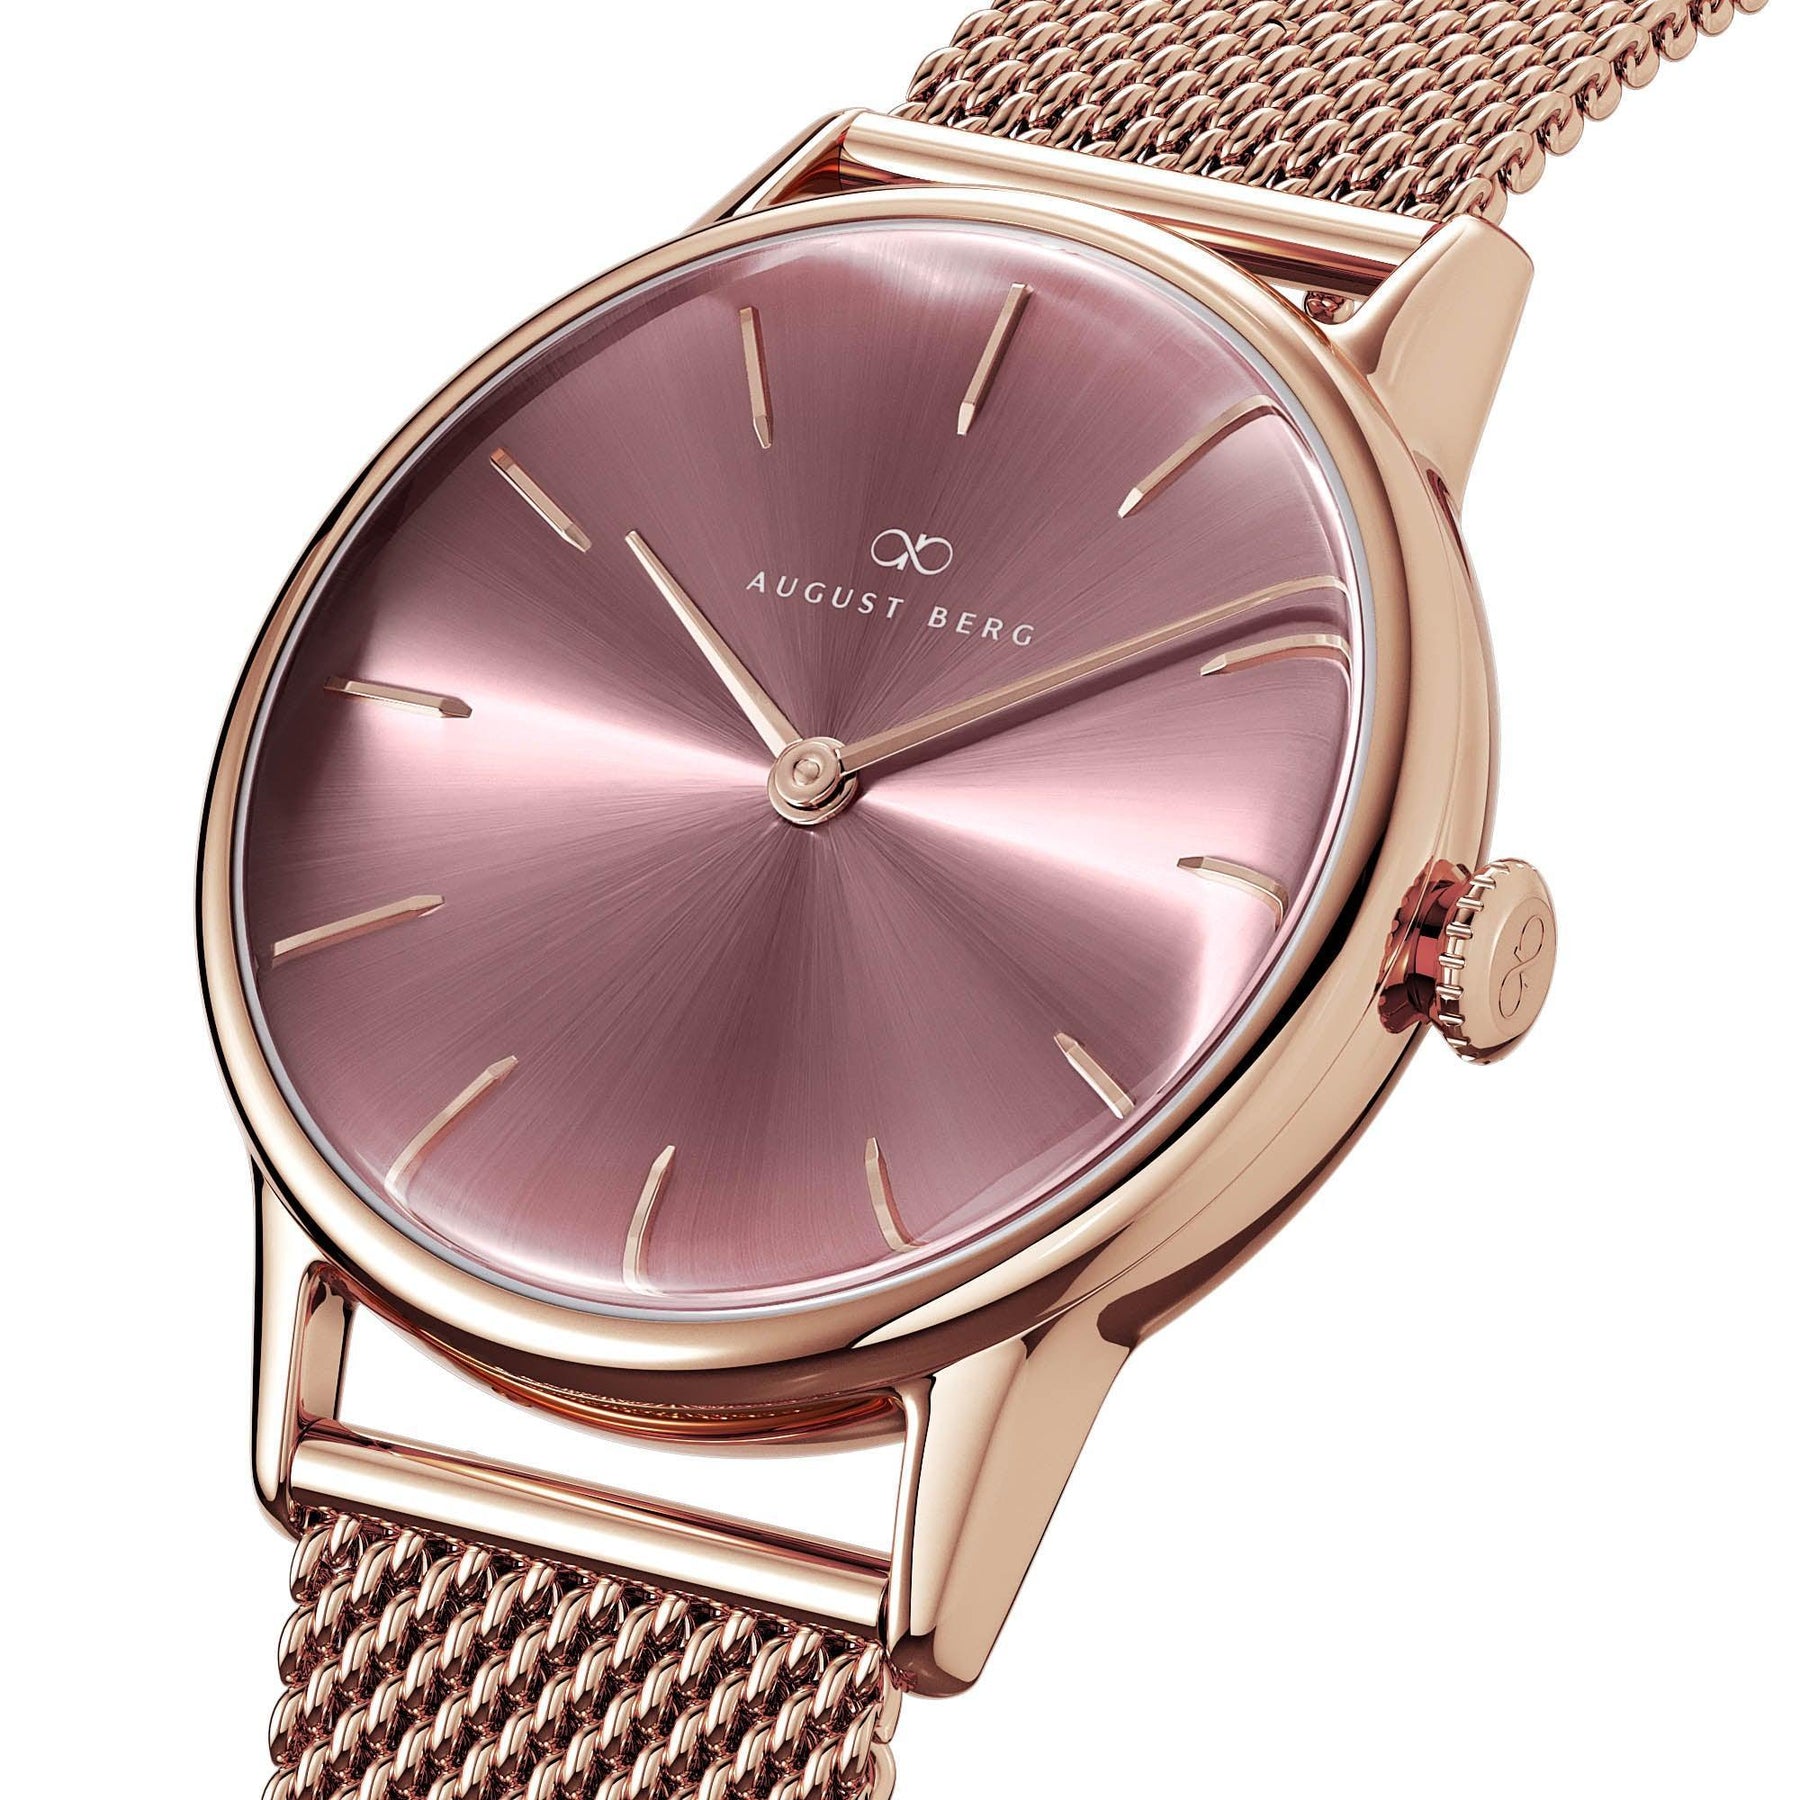 August Berg Women's Serenity Rose PVD Quartz Fashion 32mm Watch Pink Dial 10232A10MRG - Wallace Bishop